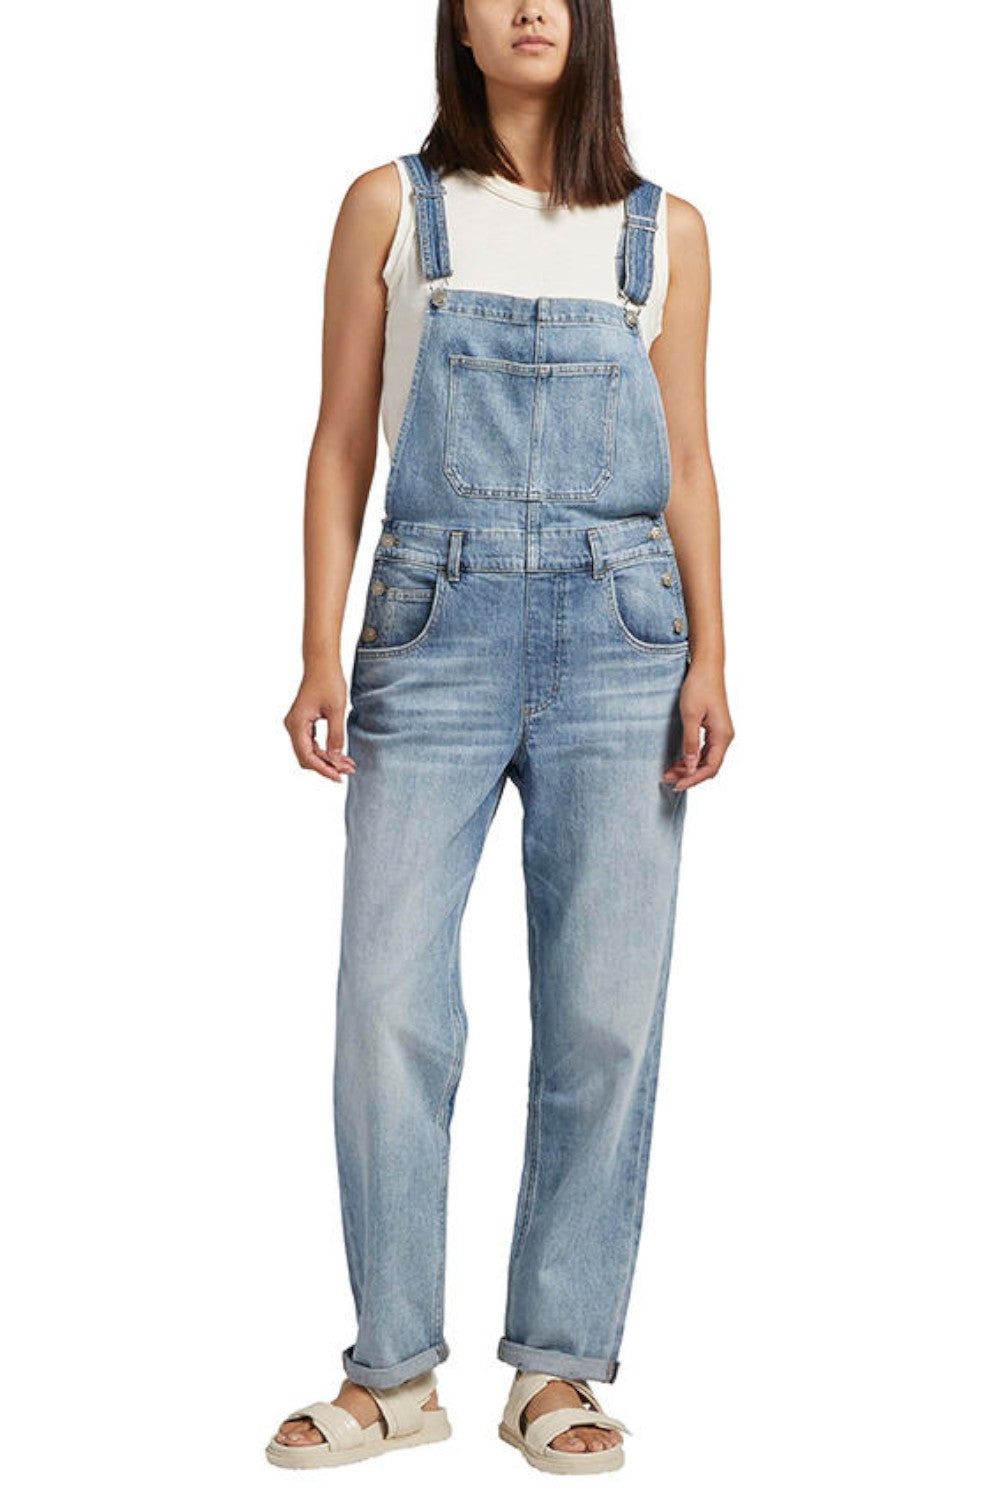 Take it back to the ‘90s with our new Baggy Denim Overalls. They’re designed with an ultra-loose fit through the waist, hip, thigh and leg for a completely authentic vintage look. Featuring classic pocketing and adjustable suspender straps and finished with an easy, straight leg.